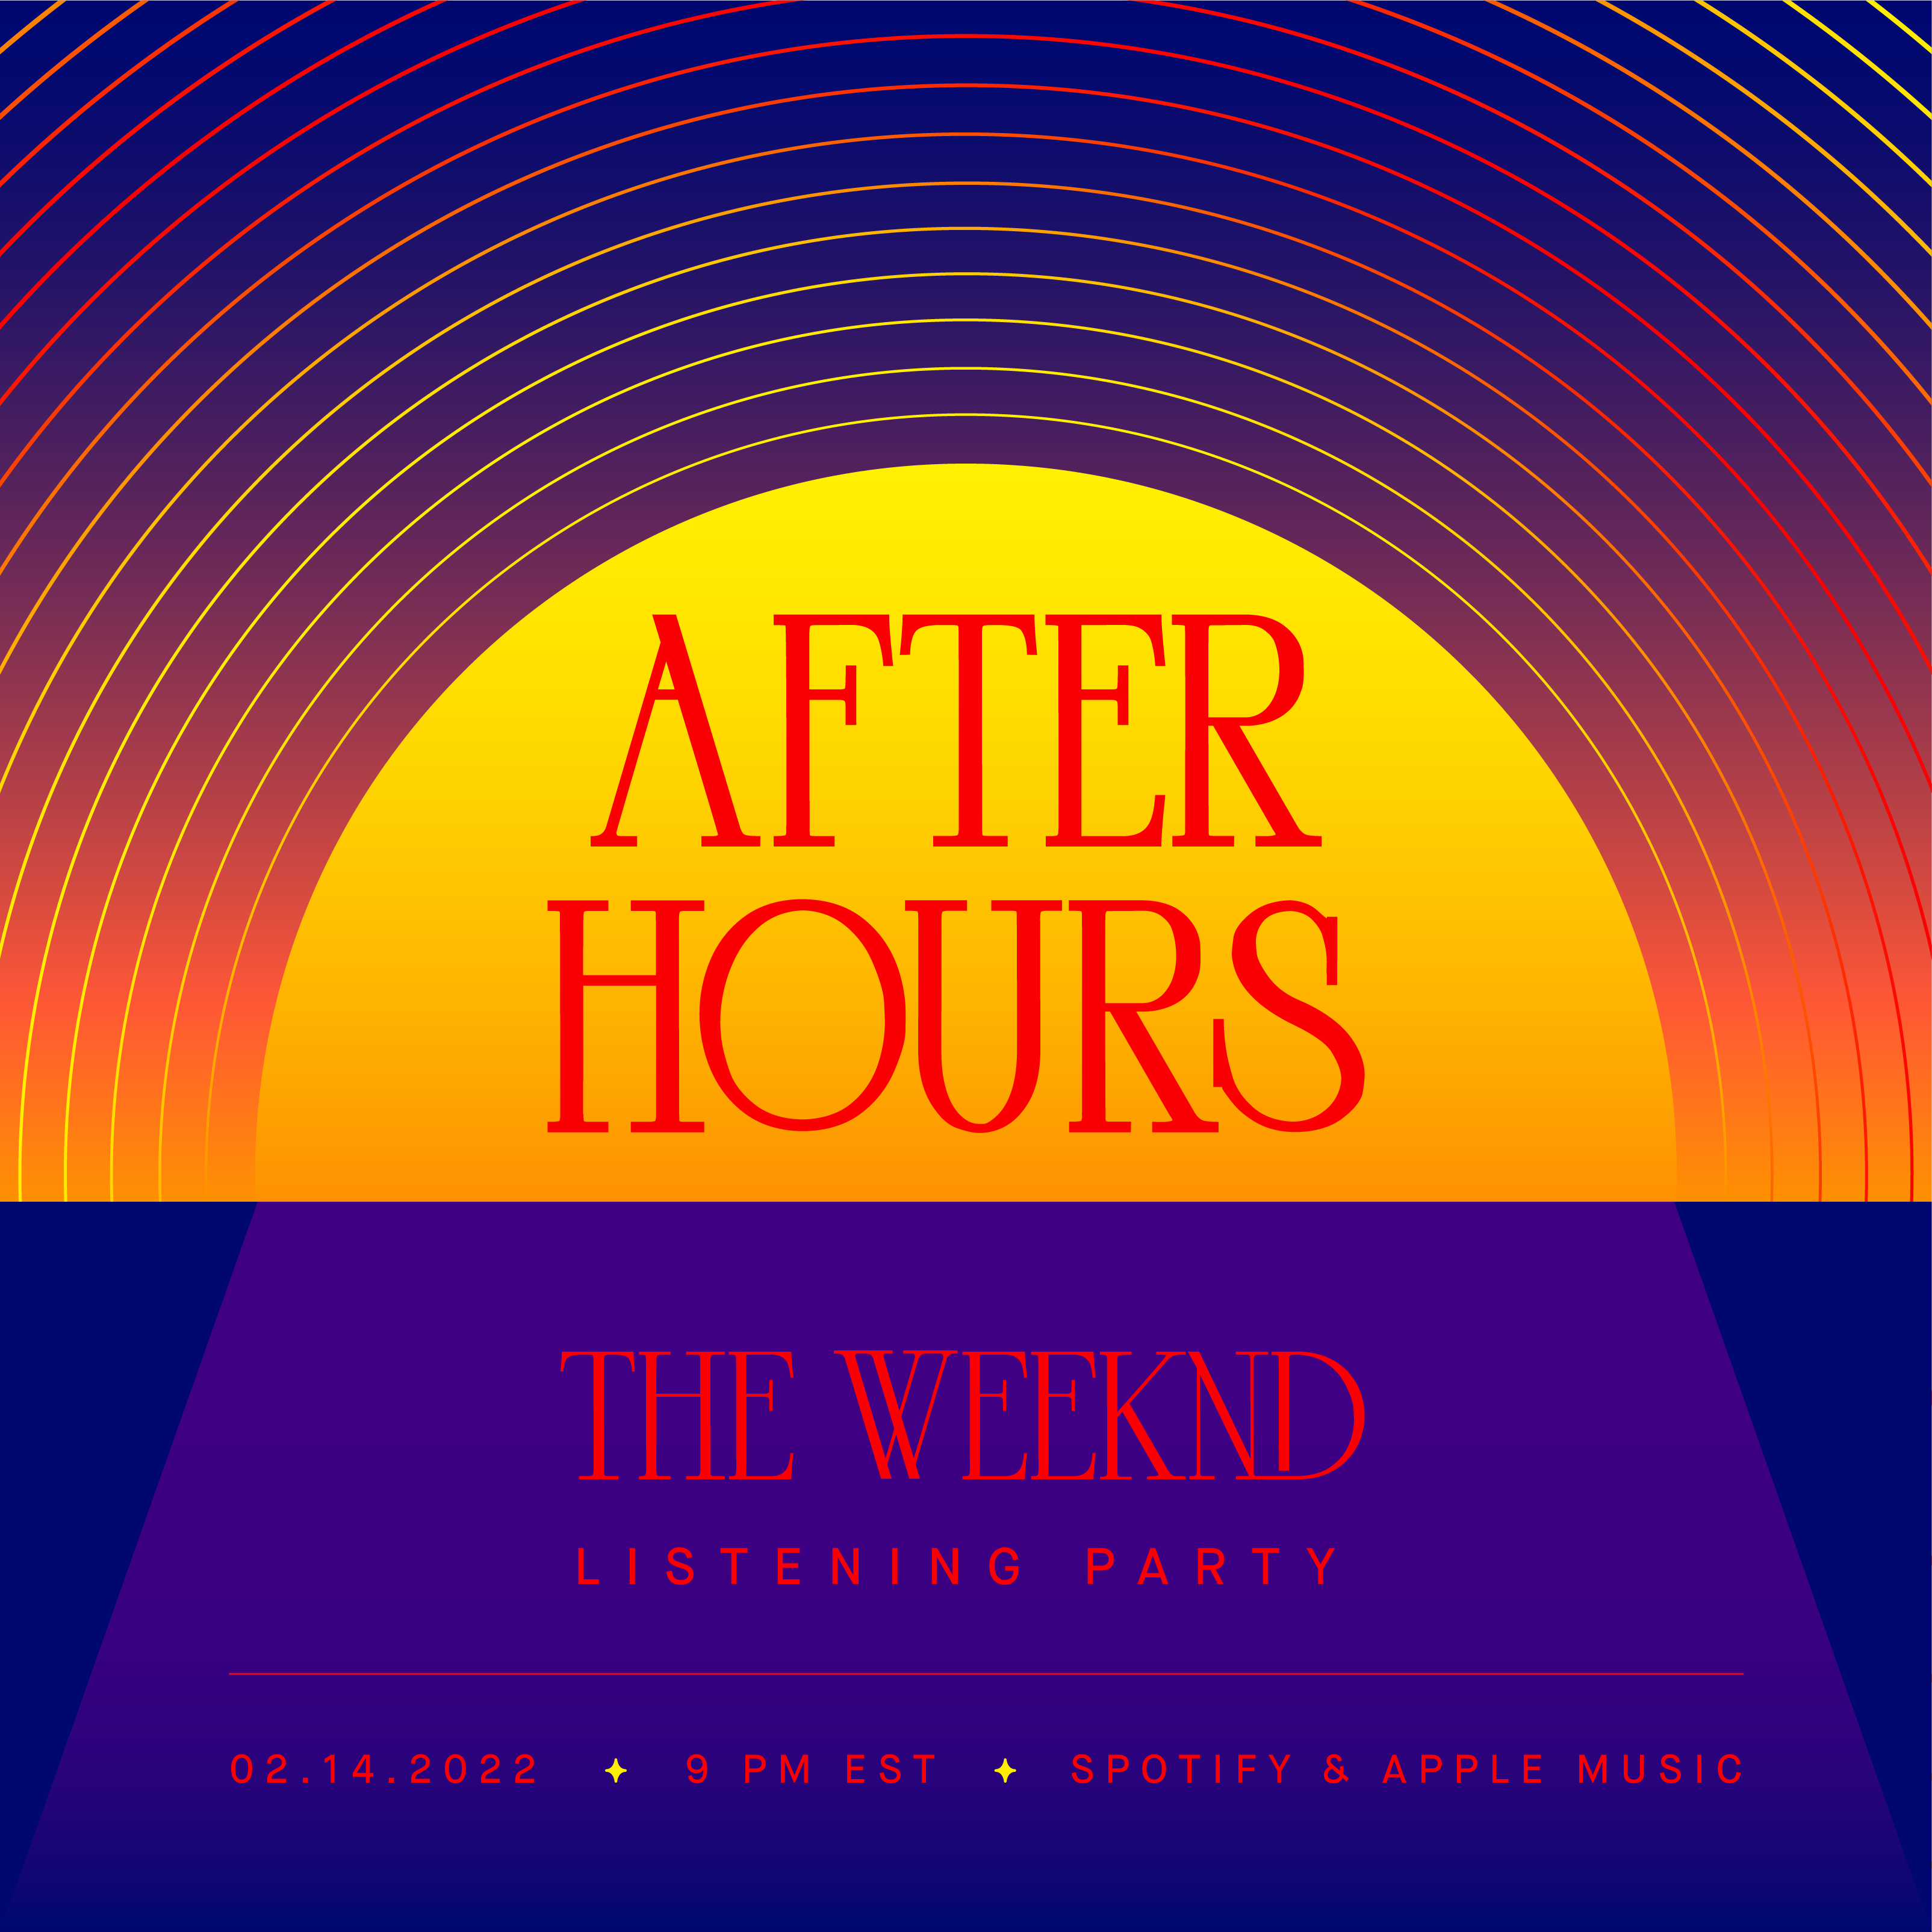 The Weeknd - After Hours Deluxe Waveform Poster by lisskand on